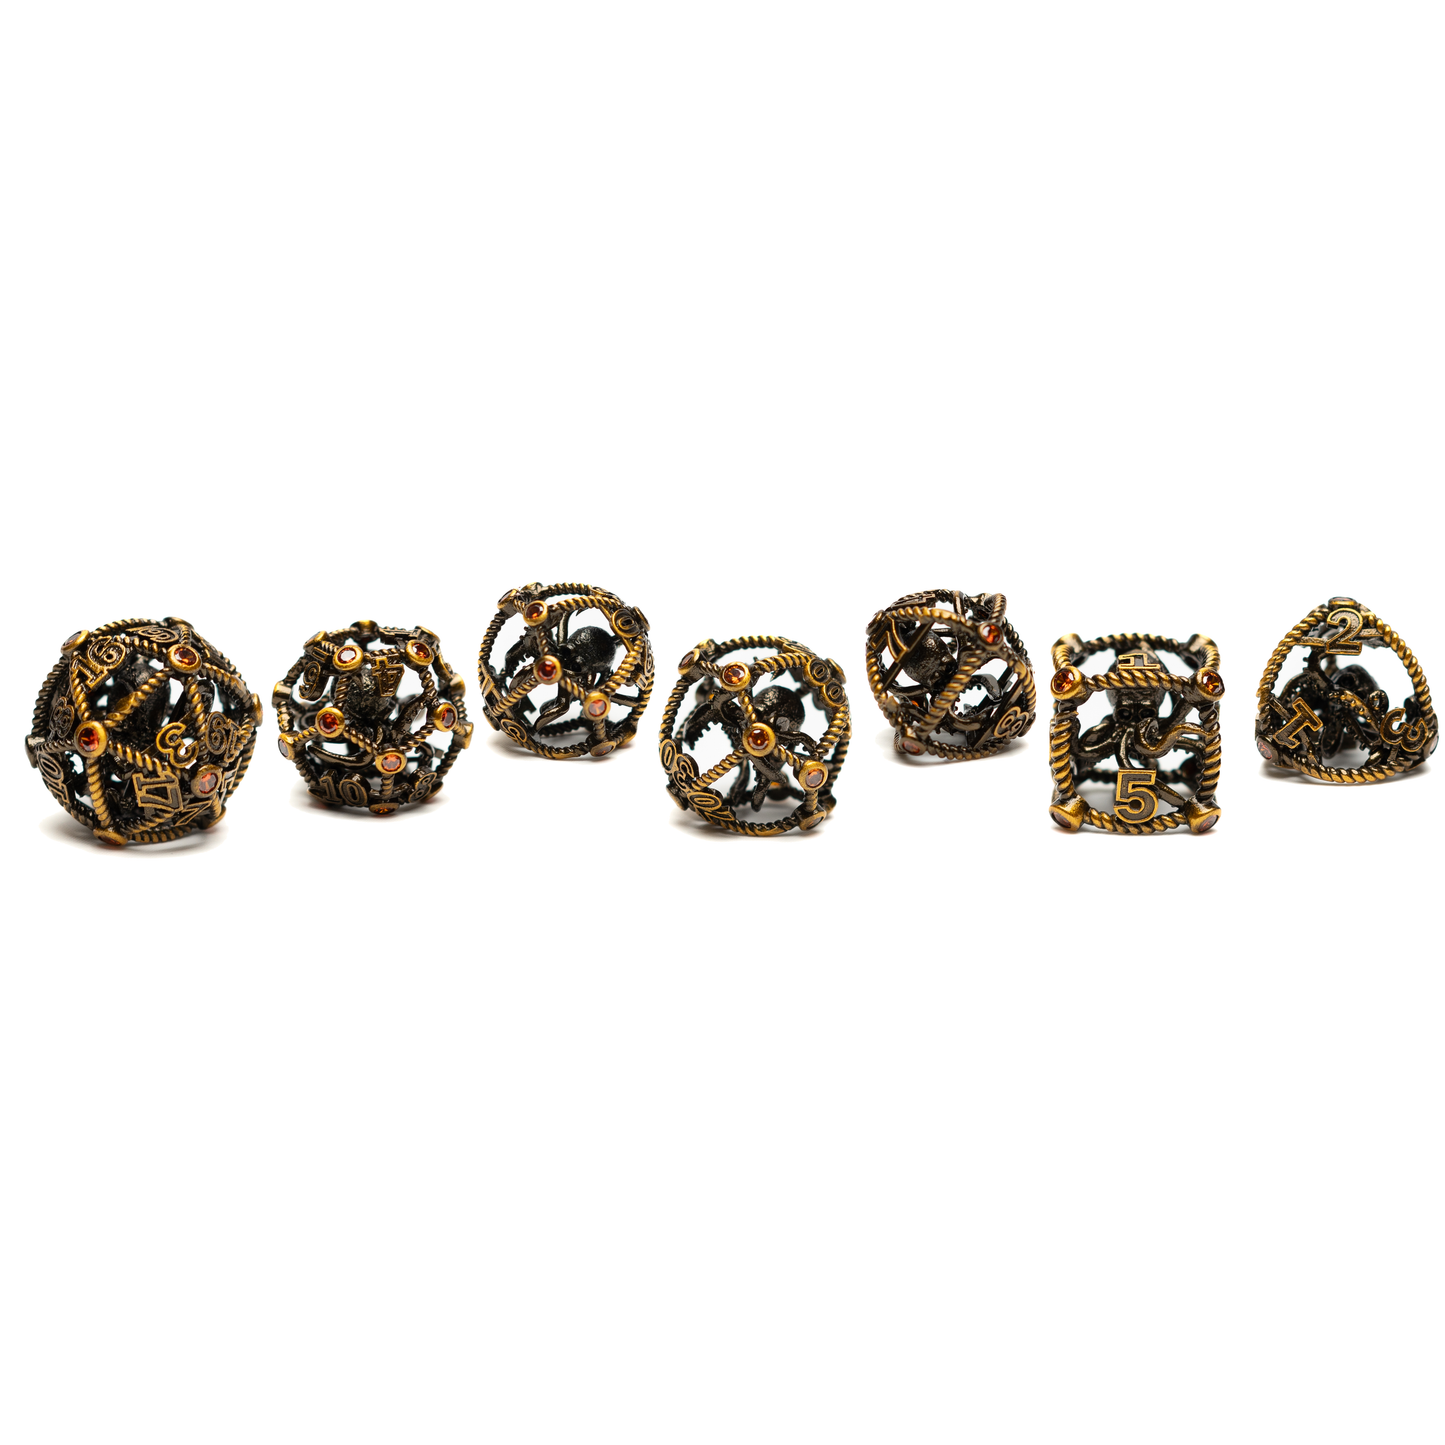 Roll Britannia Metal Dungeons and Dragons Dice Set with Nautical Kraken Aesthetic 